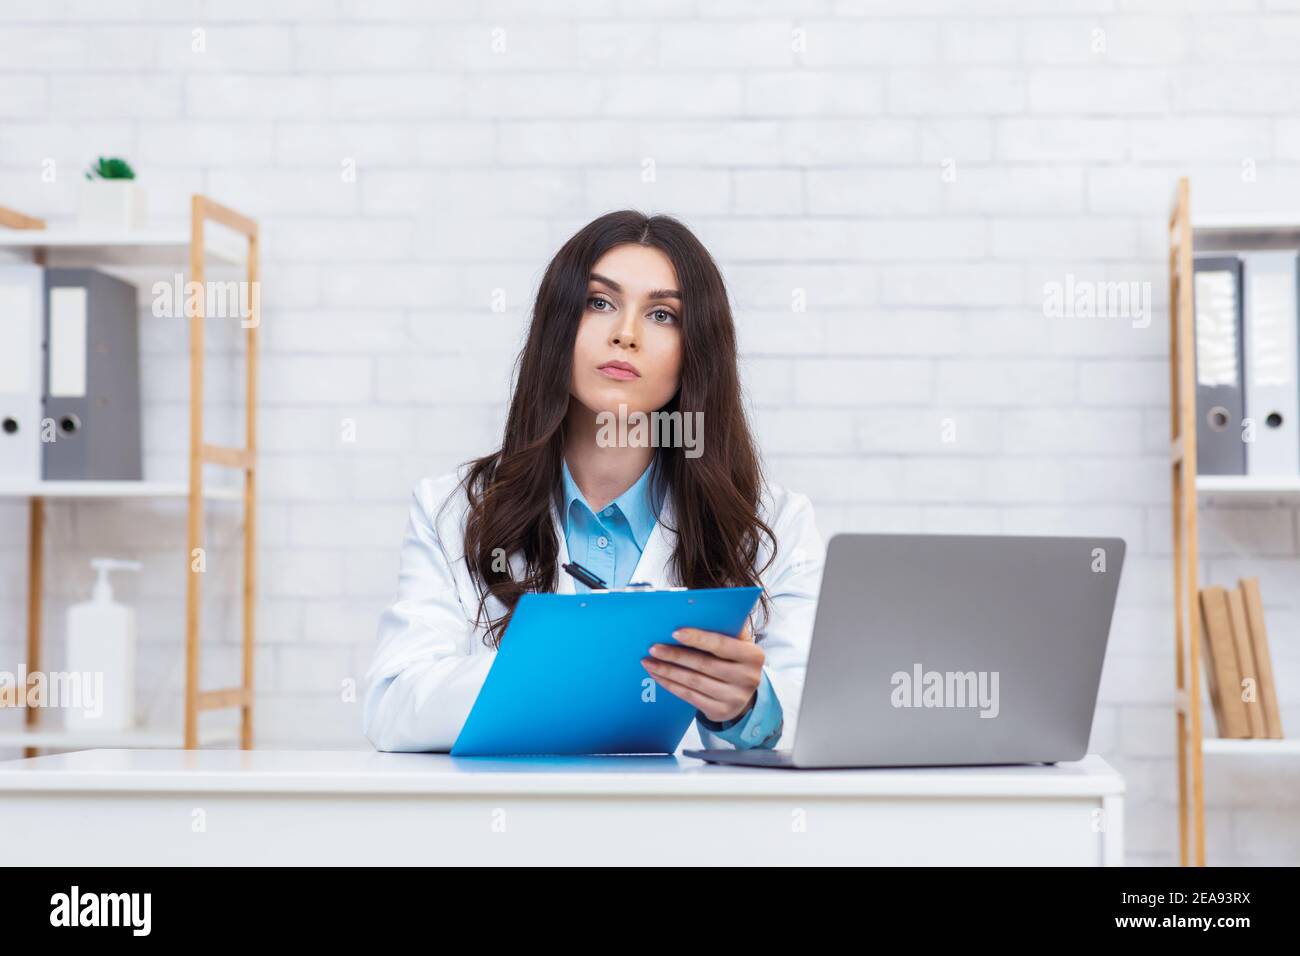 Listen to patient complaints, visit to therapist in modern clinic Stock Photo